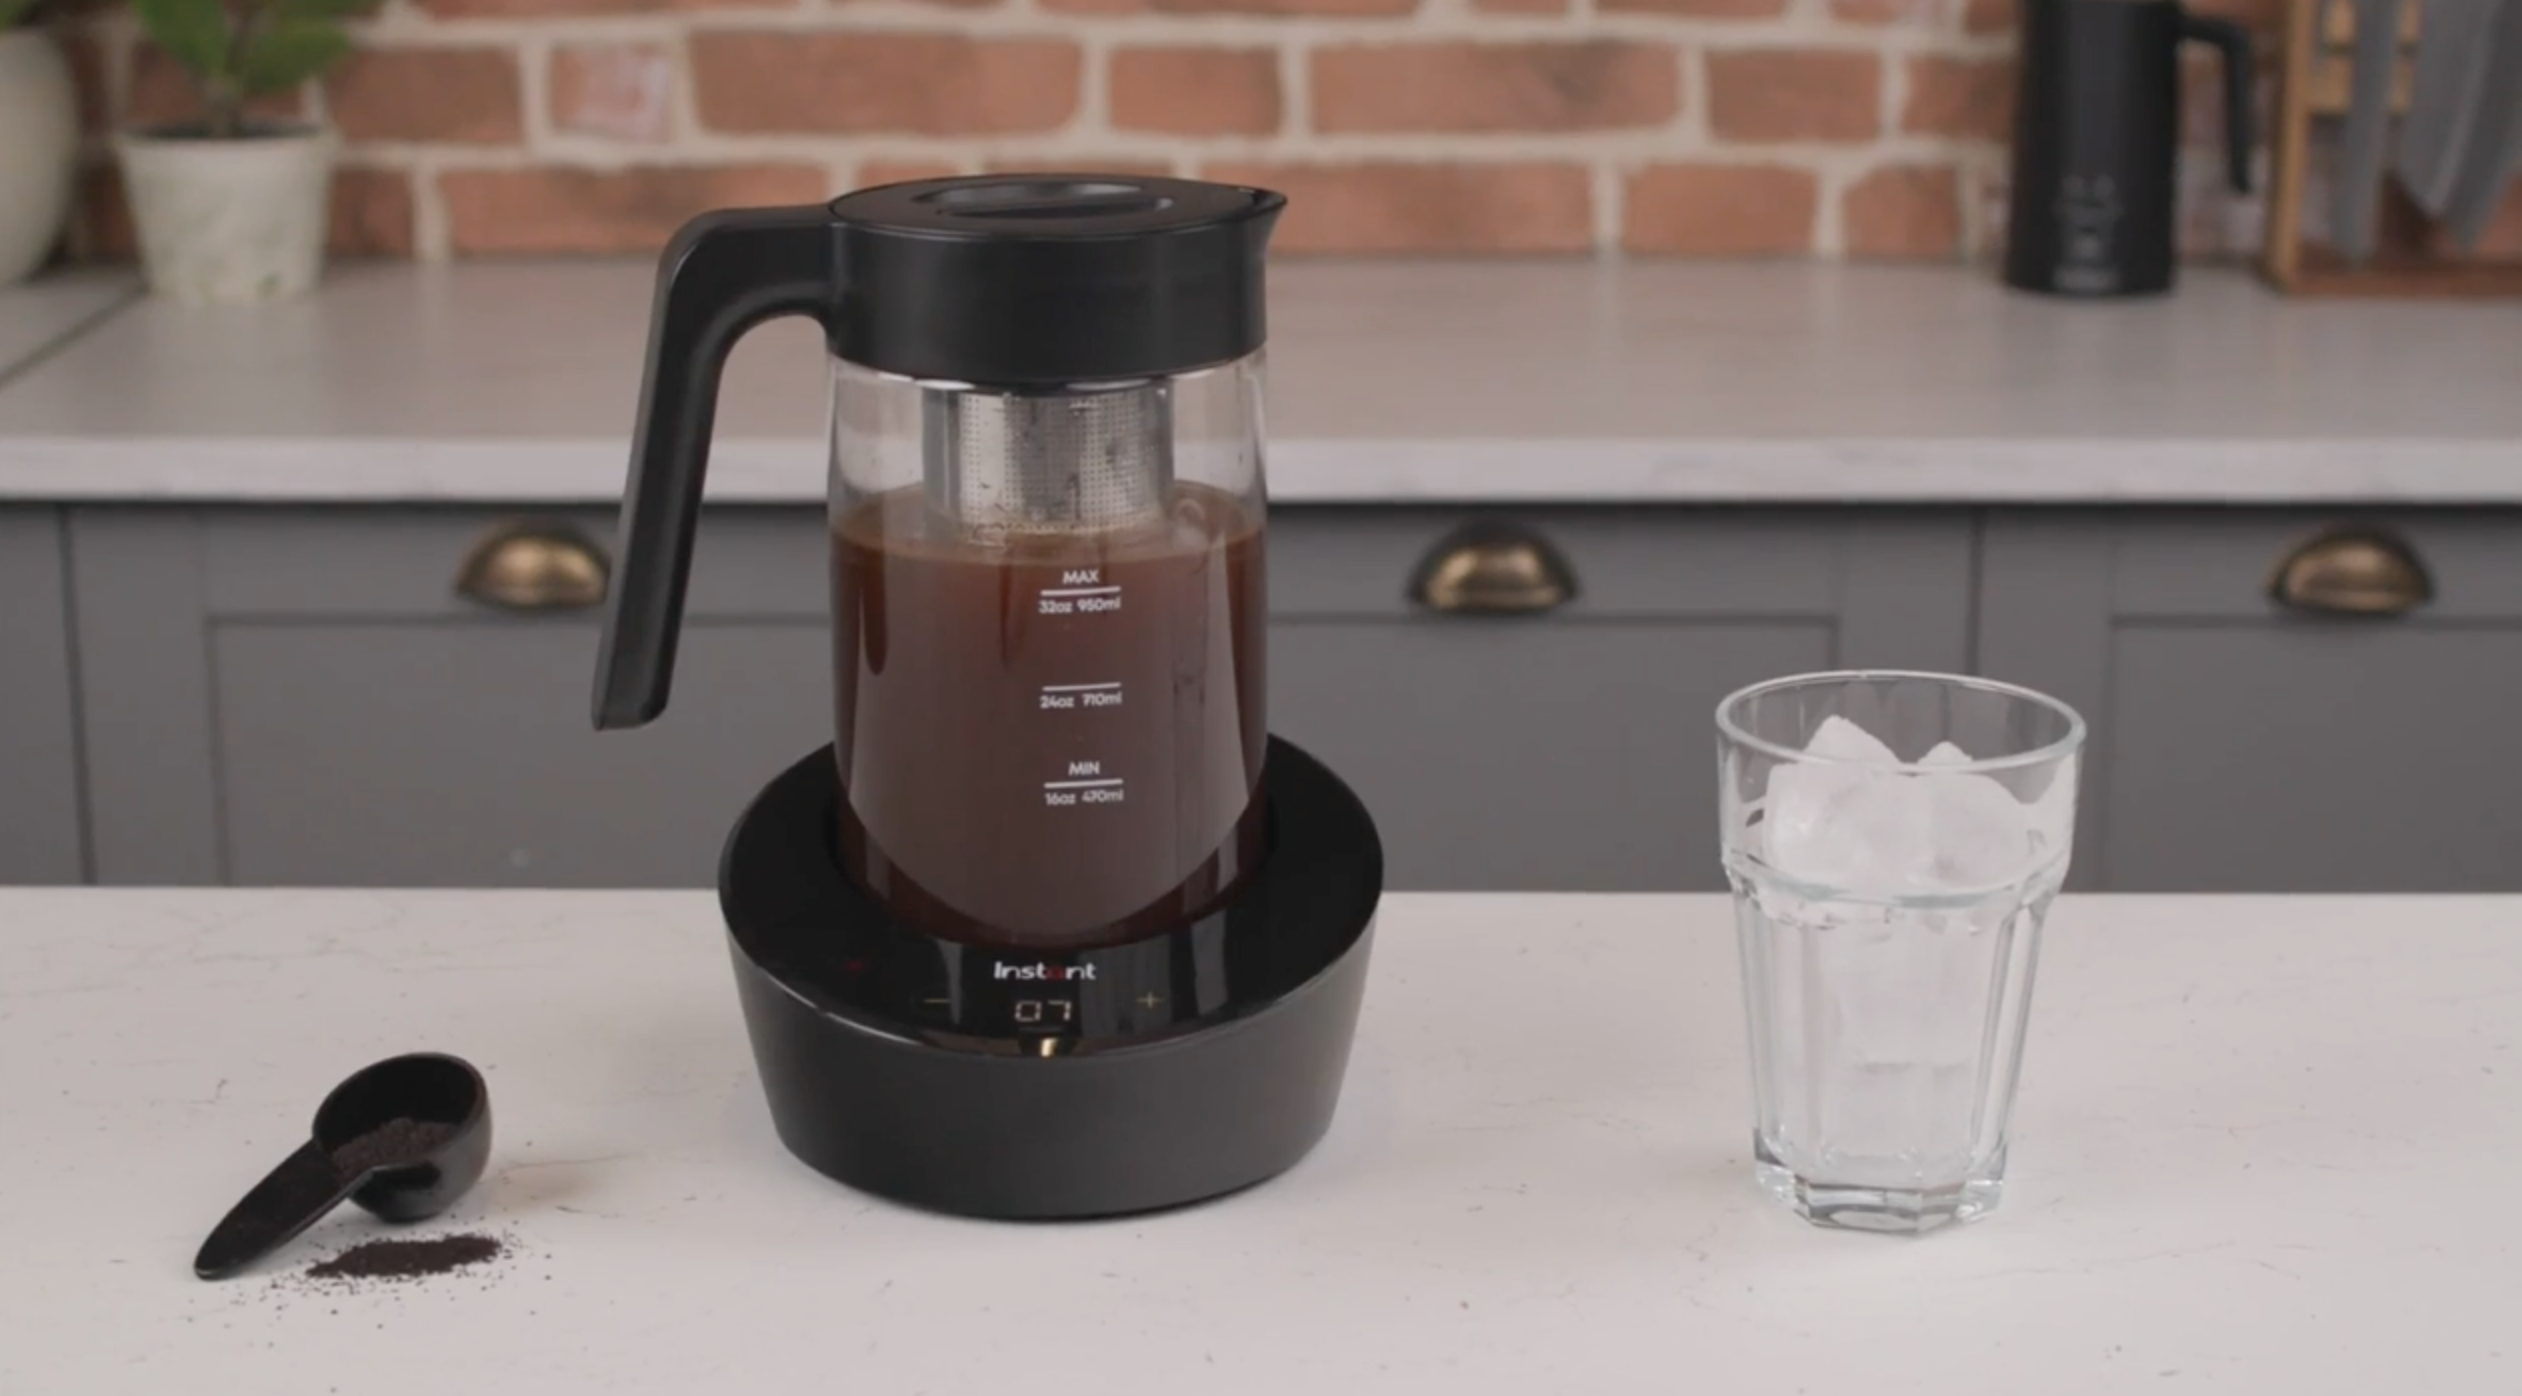 The cold brew maker featuring an electric base, a removable glass pitcher with a built-in coffee filter